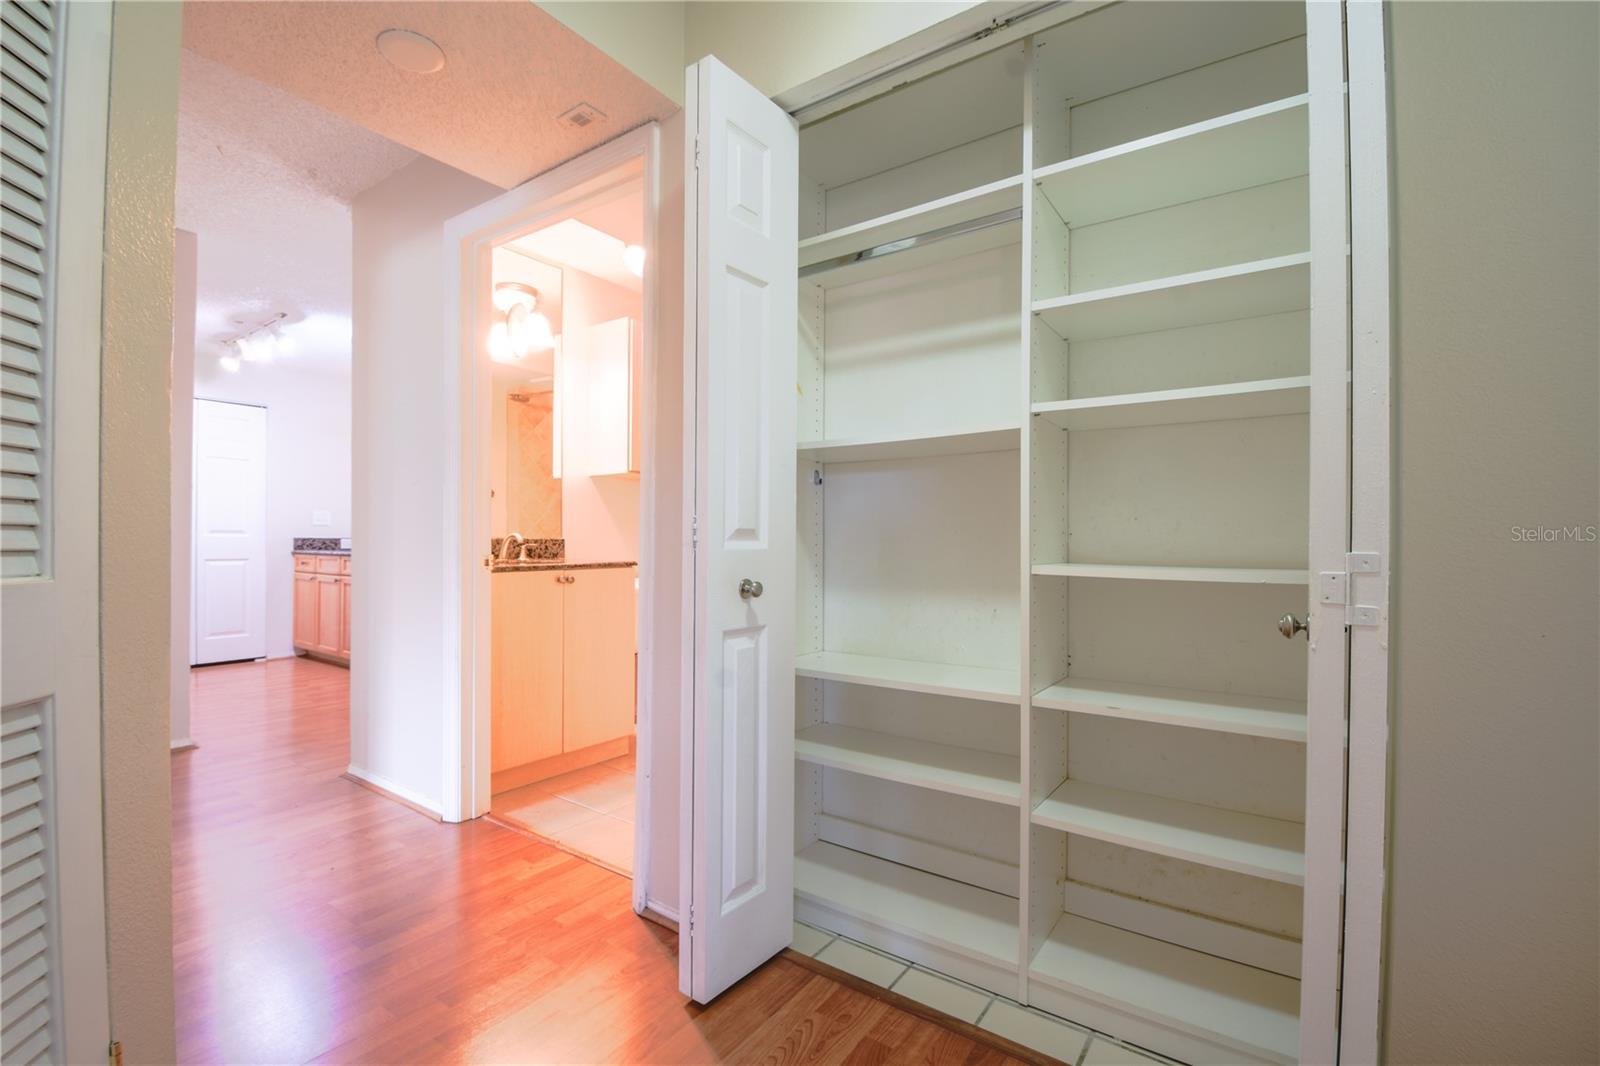 This home features a large built in closet in the entry hall.